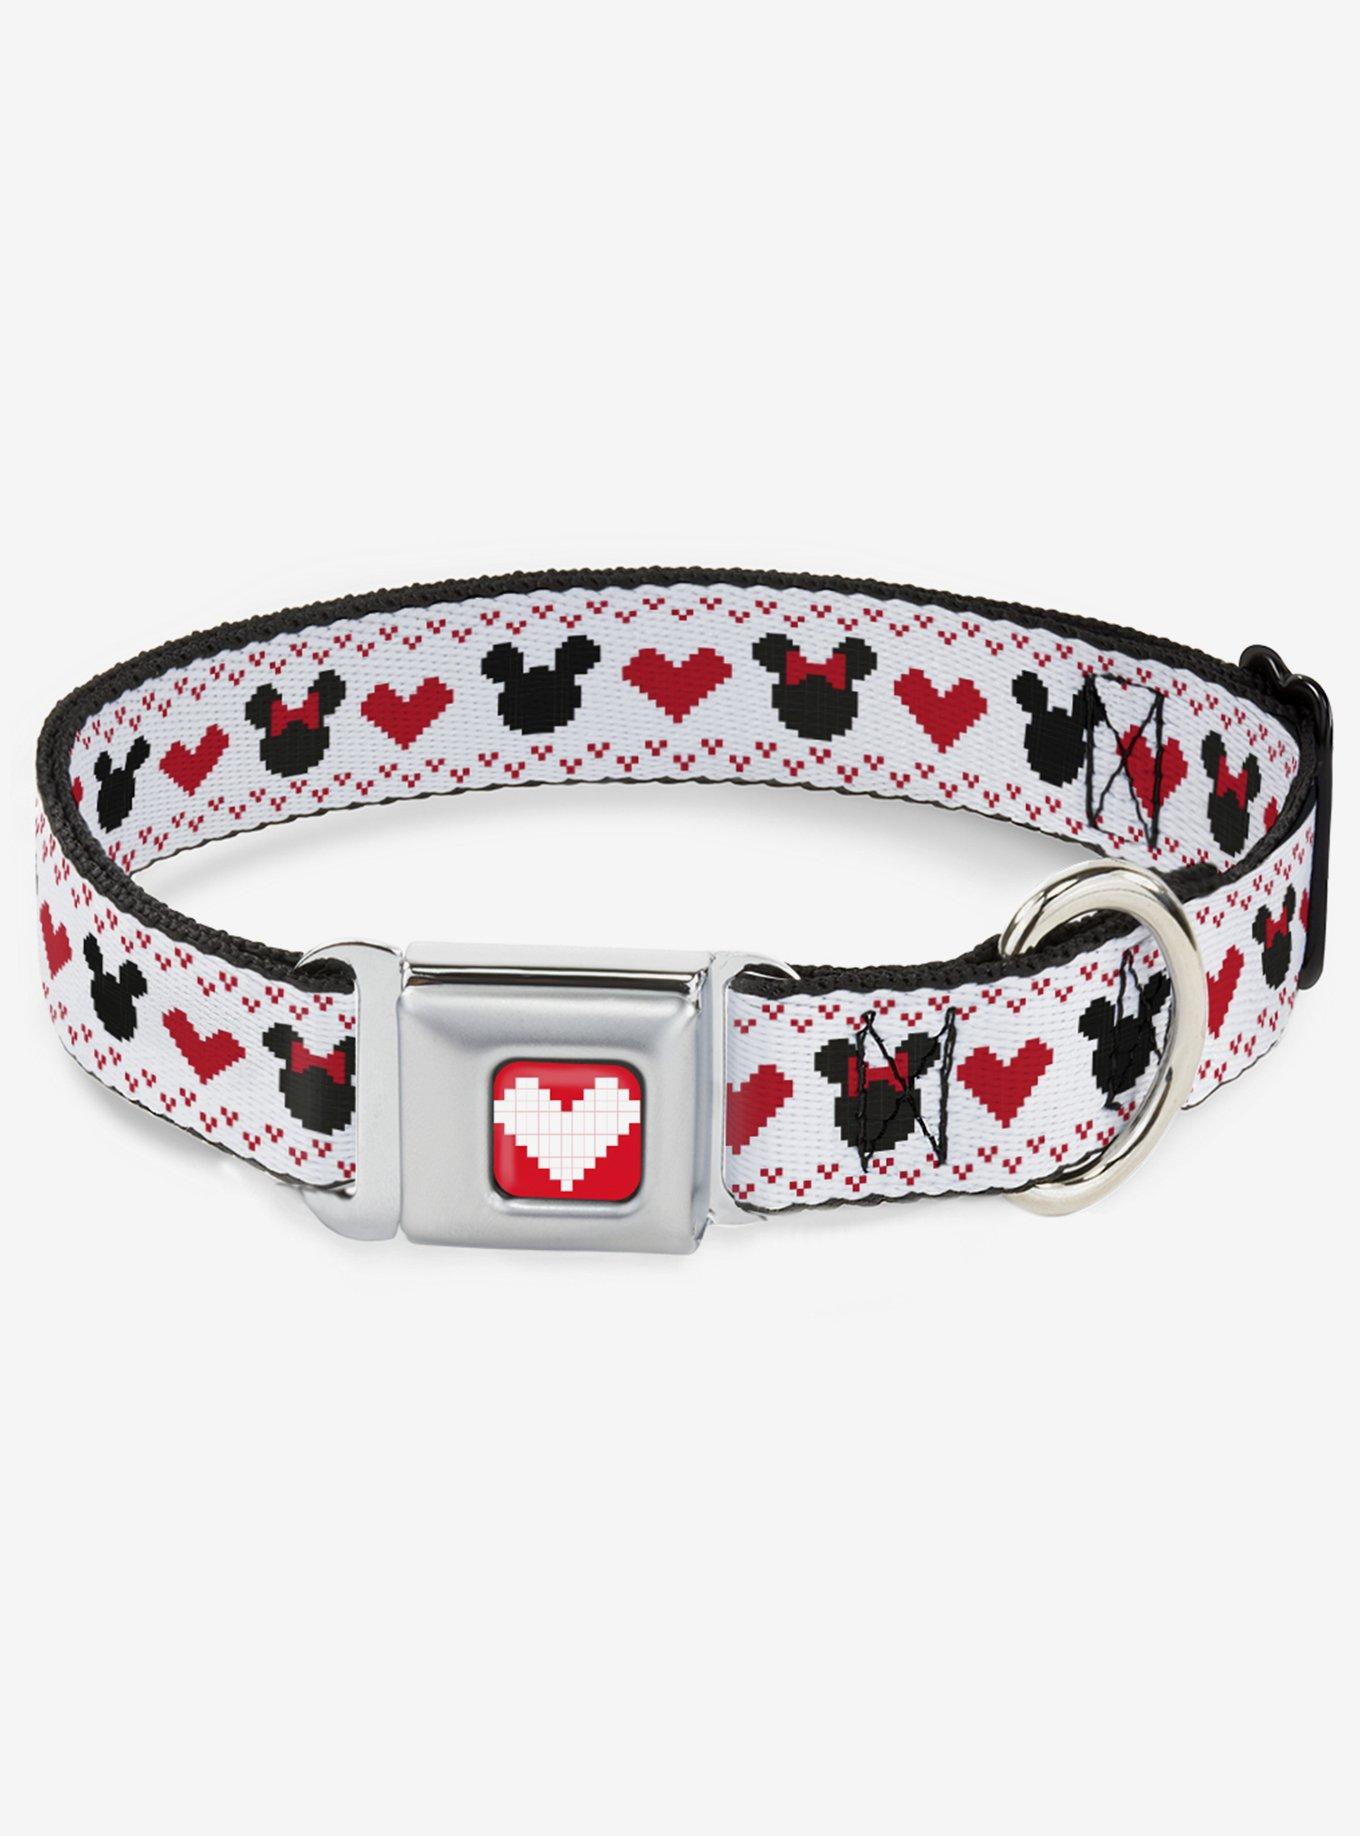 Disney Mickey Mouse And Minnie Mouse Heart Sweater Seatbelt Buckle Dog Collar, MULTICOLOR, hi-res